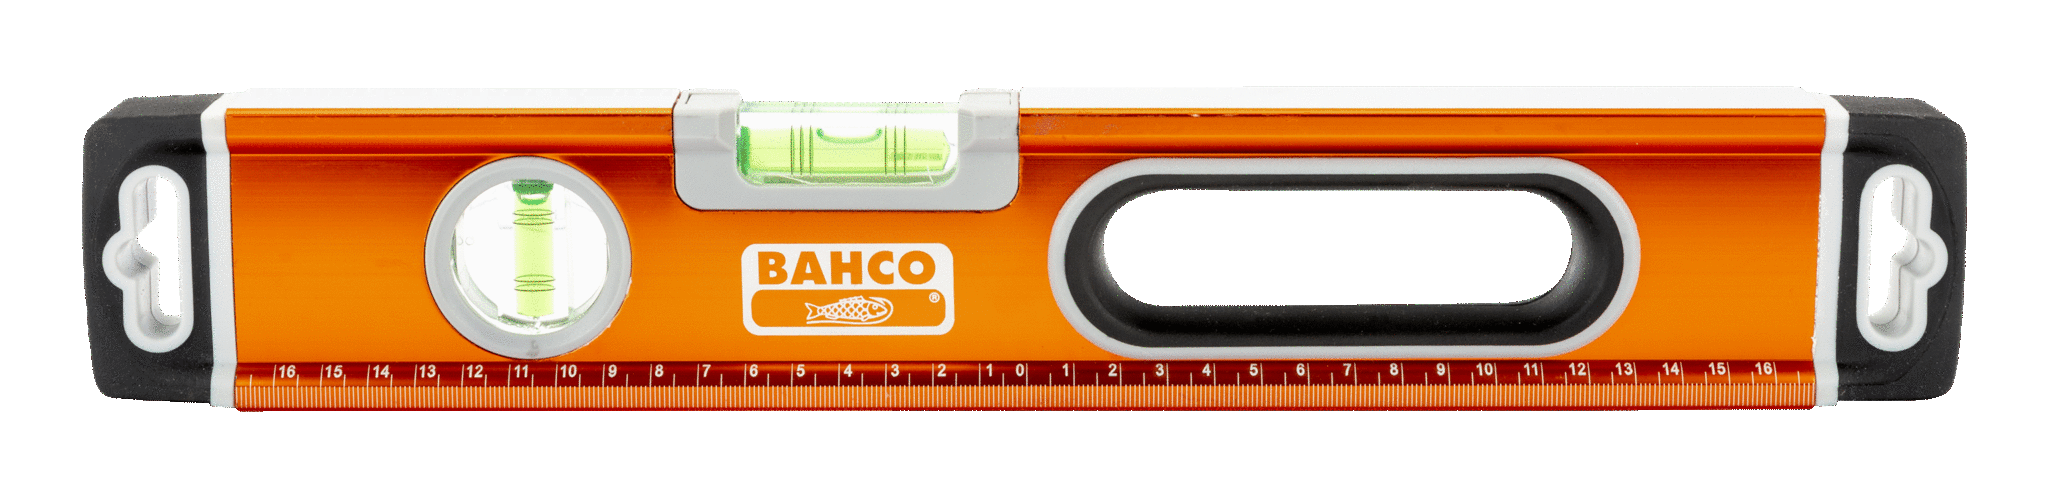 Thick Shaped Aluminium Profile Spirit Levels - 466 by Bahco